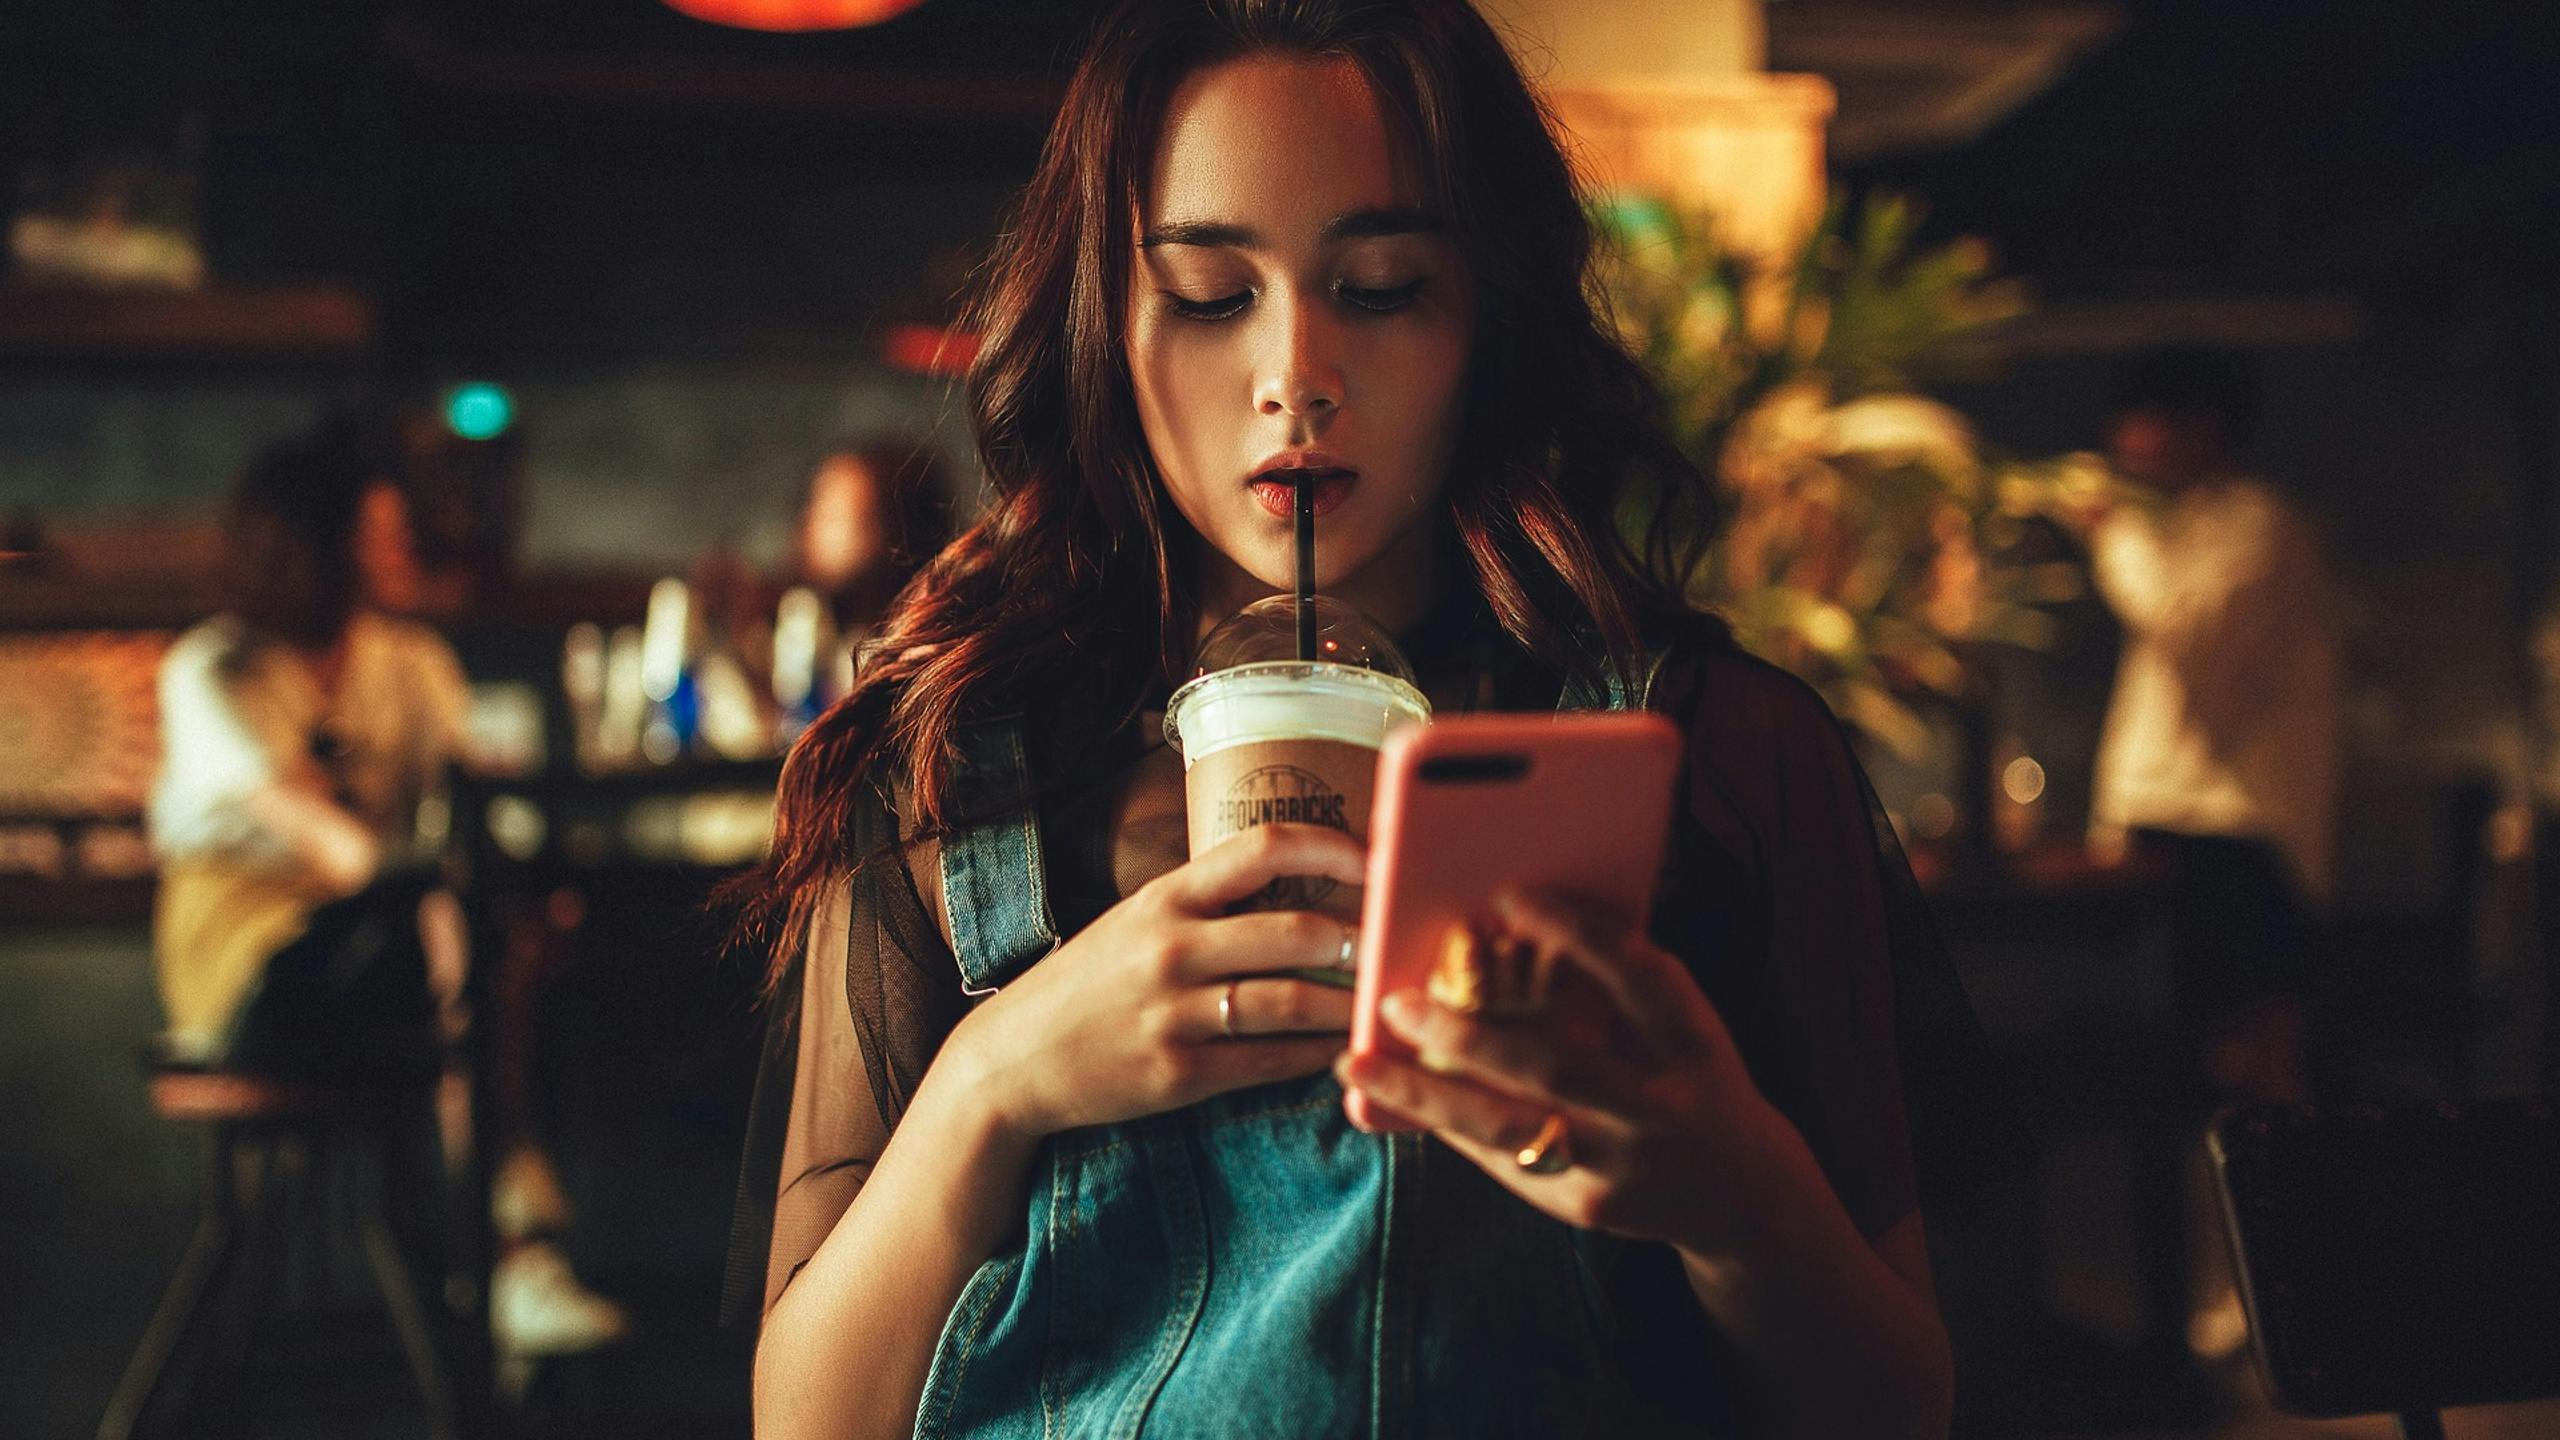 Woman staring at phone while drinking coffee